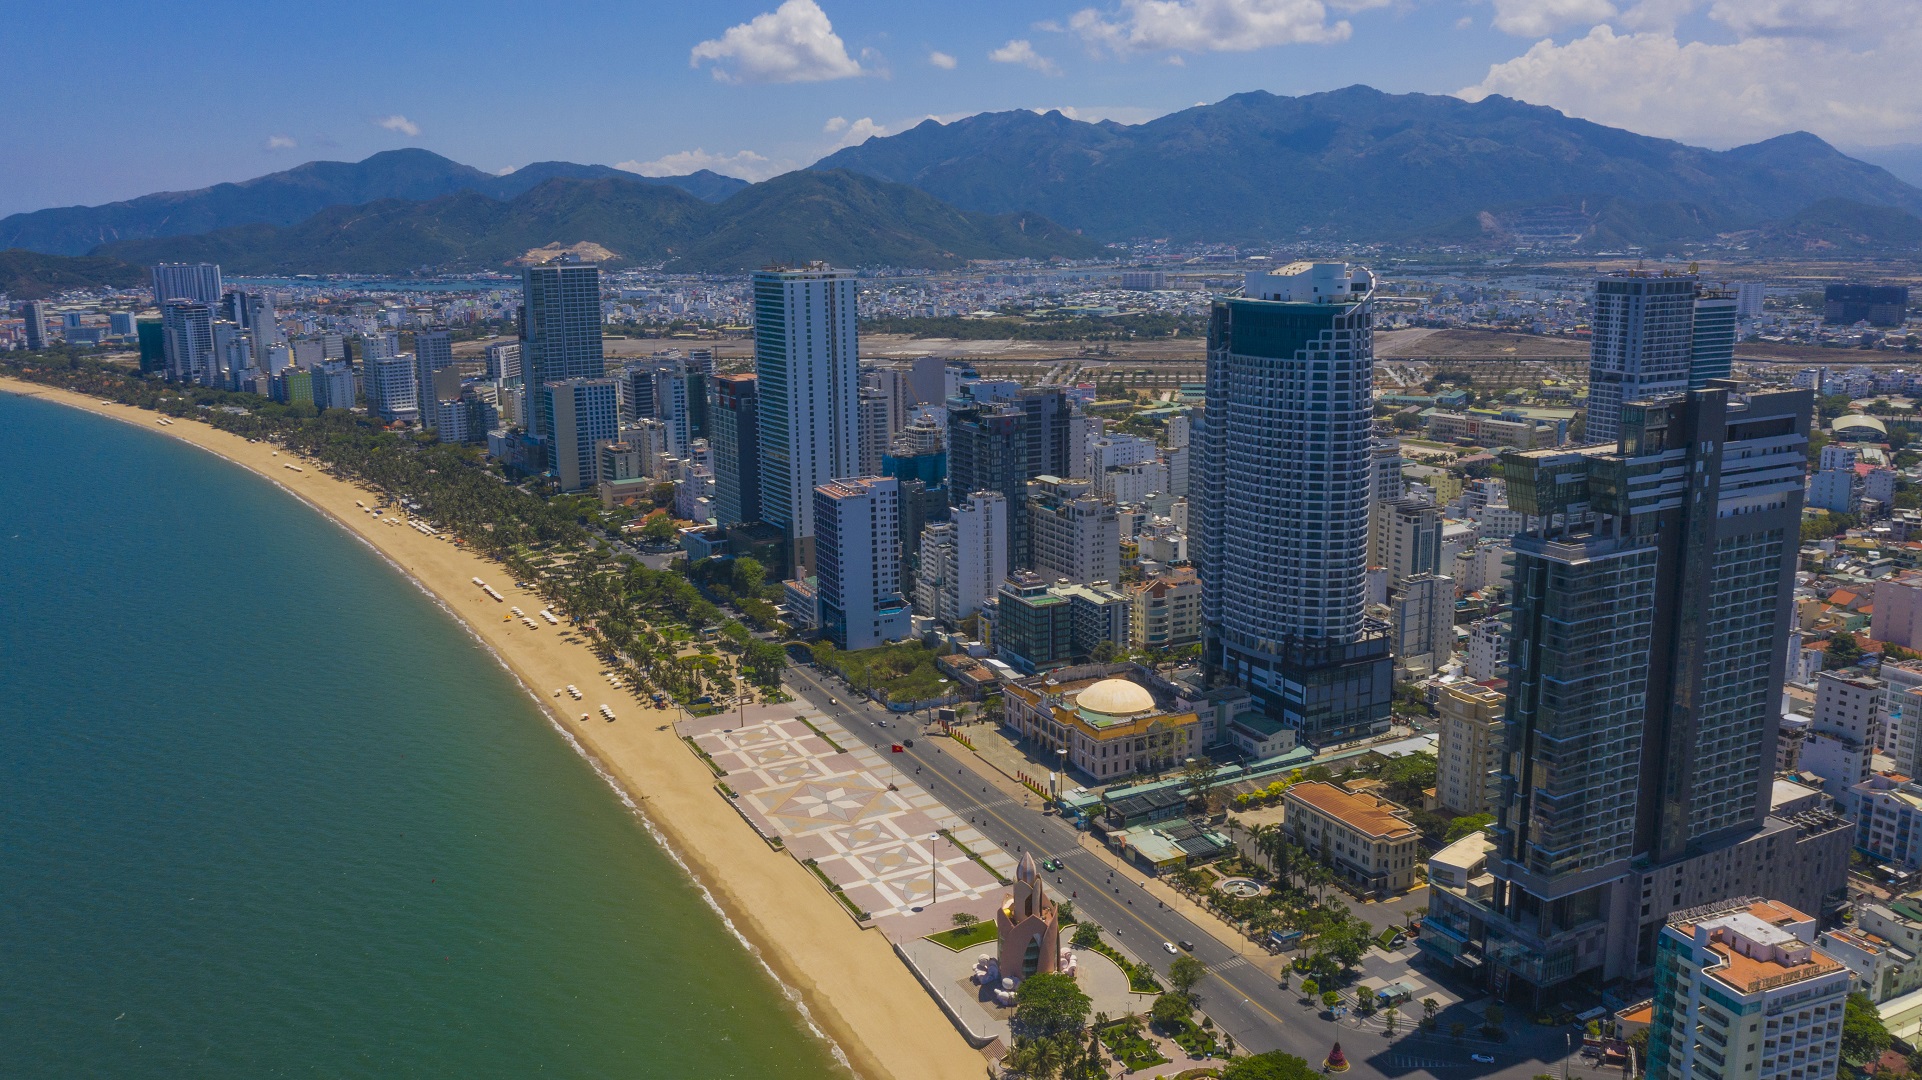 An aerial photo shows buildings along the beach in the tourism city of Nha Trang. Photo: Quang Dinh / Tuoi Tre News